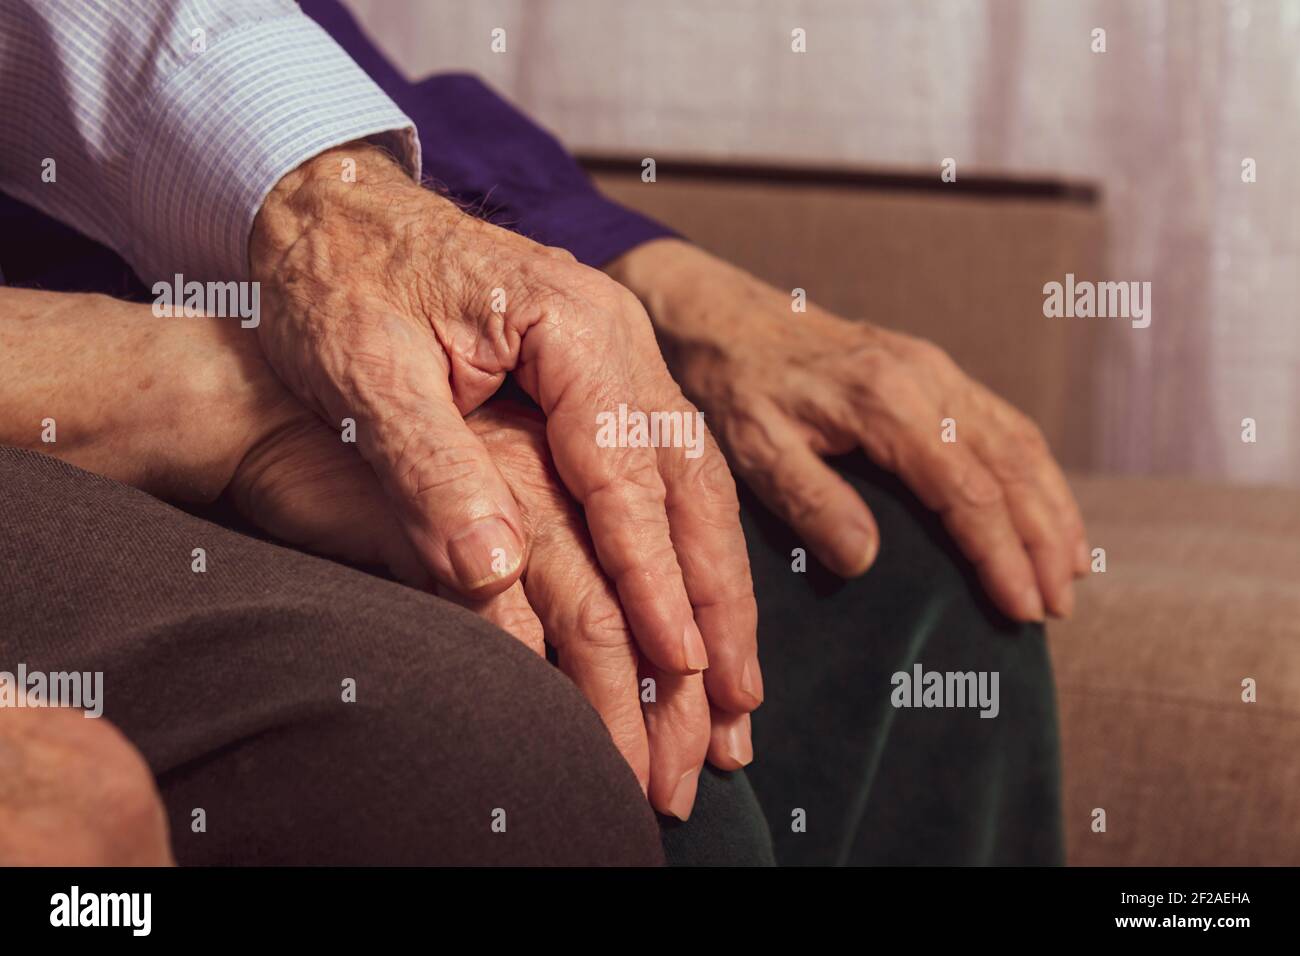 Senior's supporting hand covering wife's hand for support. Nursing home concept. Old woman and man hands. Love and care in marriage. Close-up. Stock Photo